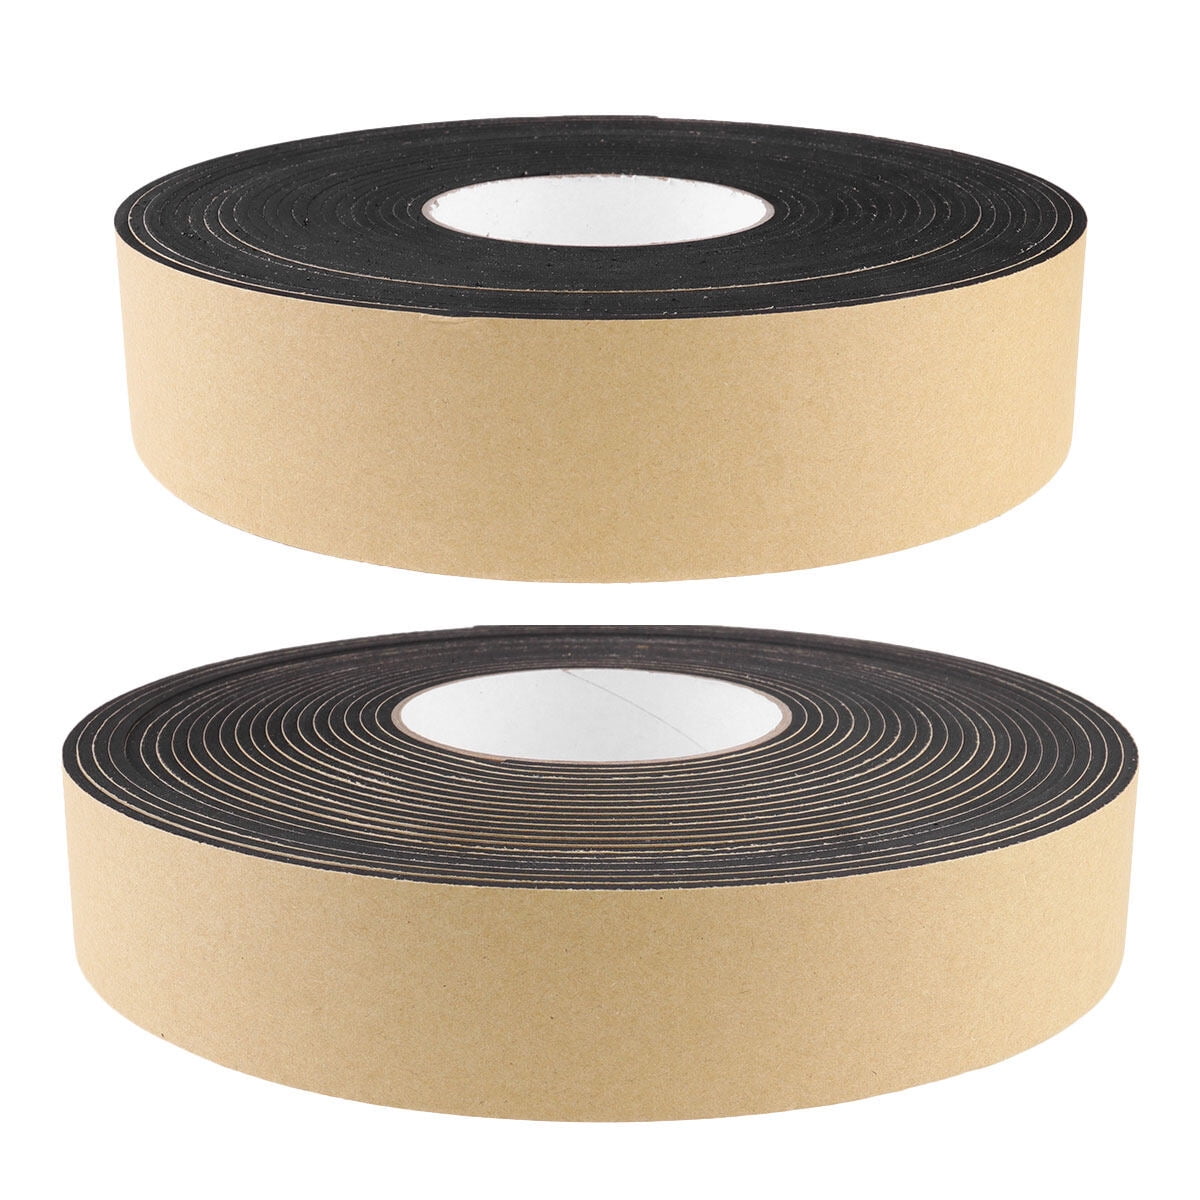 1 Pack 2 inch x 60yd STIKK Black Painters Tape 14 Day Easy Removal Trim  Edge Finishing Decorative Marking Masking Tape (1.88 in 48MM) - Imported  Products from USA - iBhejo